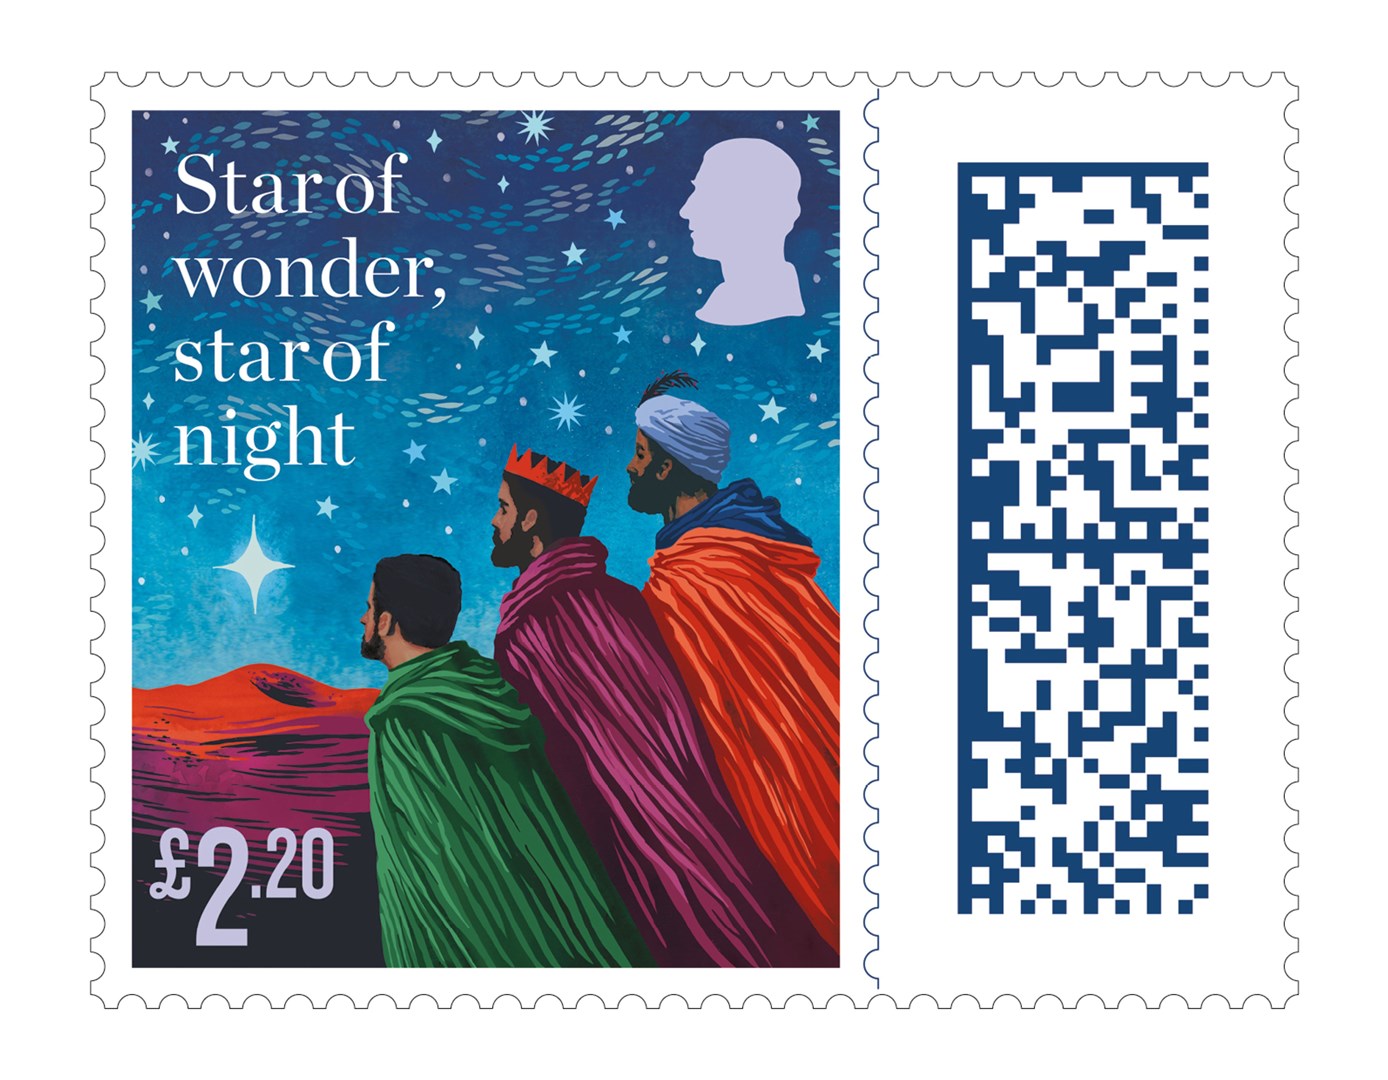 The stamps are inspired by traditional Christmas carols O Holy Night, O Little Town of Bethlehem, Silent Night, Away in a Manger, and We Three Kings (Royal Mail/PA)